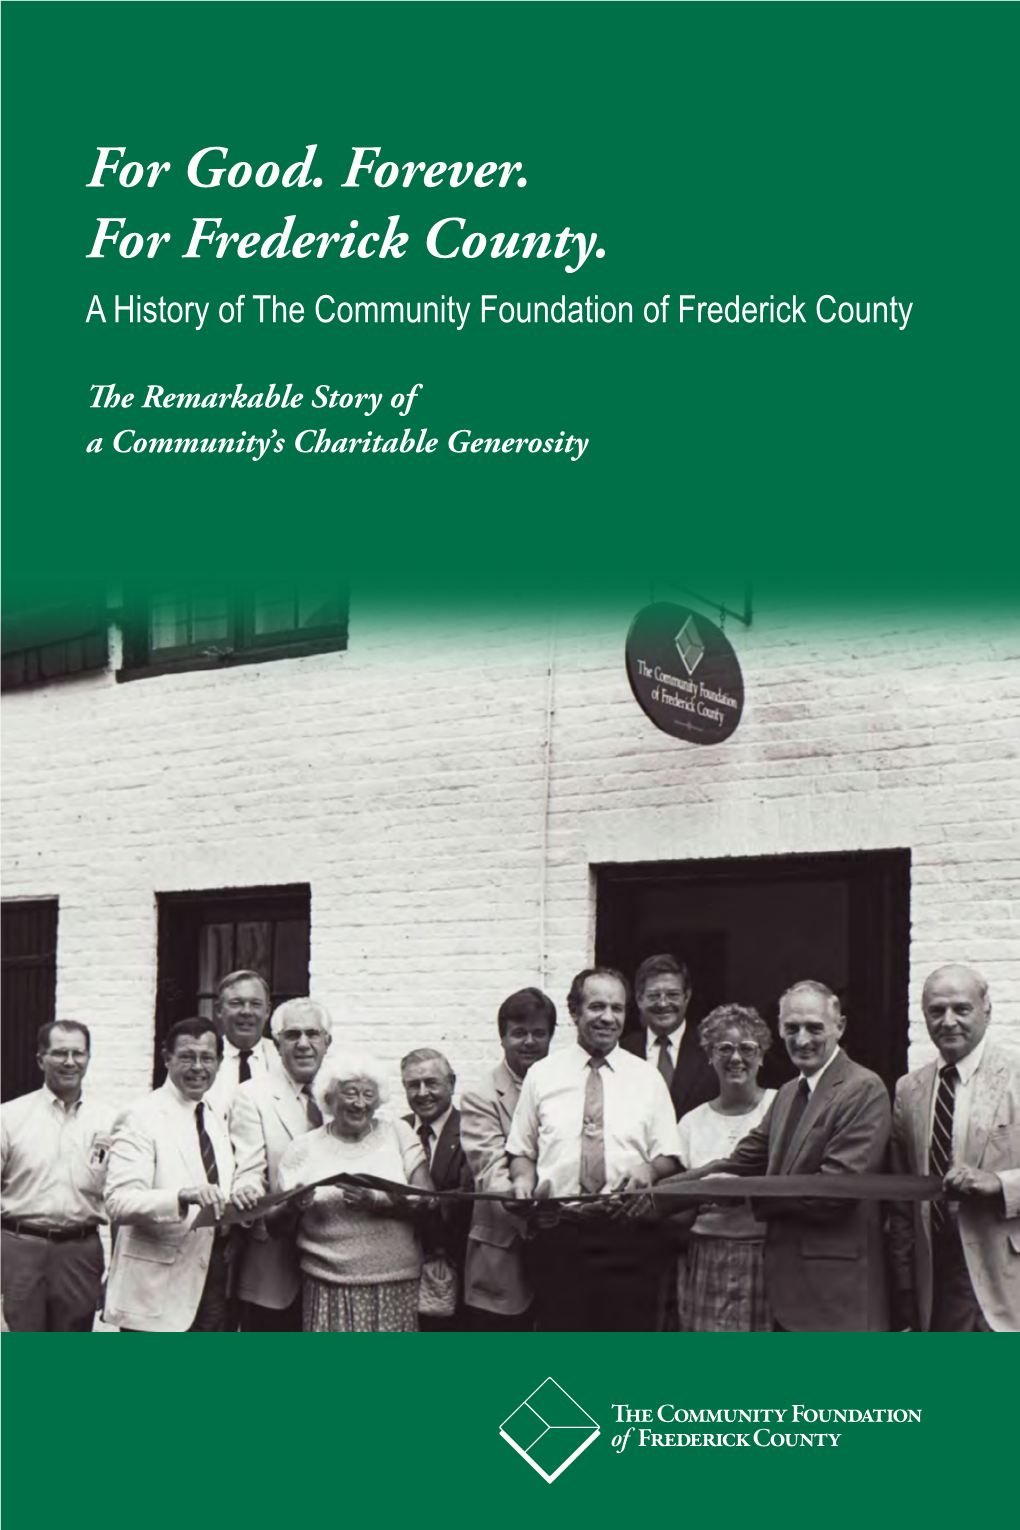 For Good. Forever. for Frederick County. a History of the Community Foundation of Frederick County